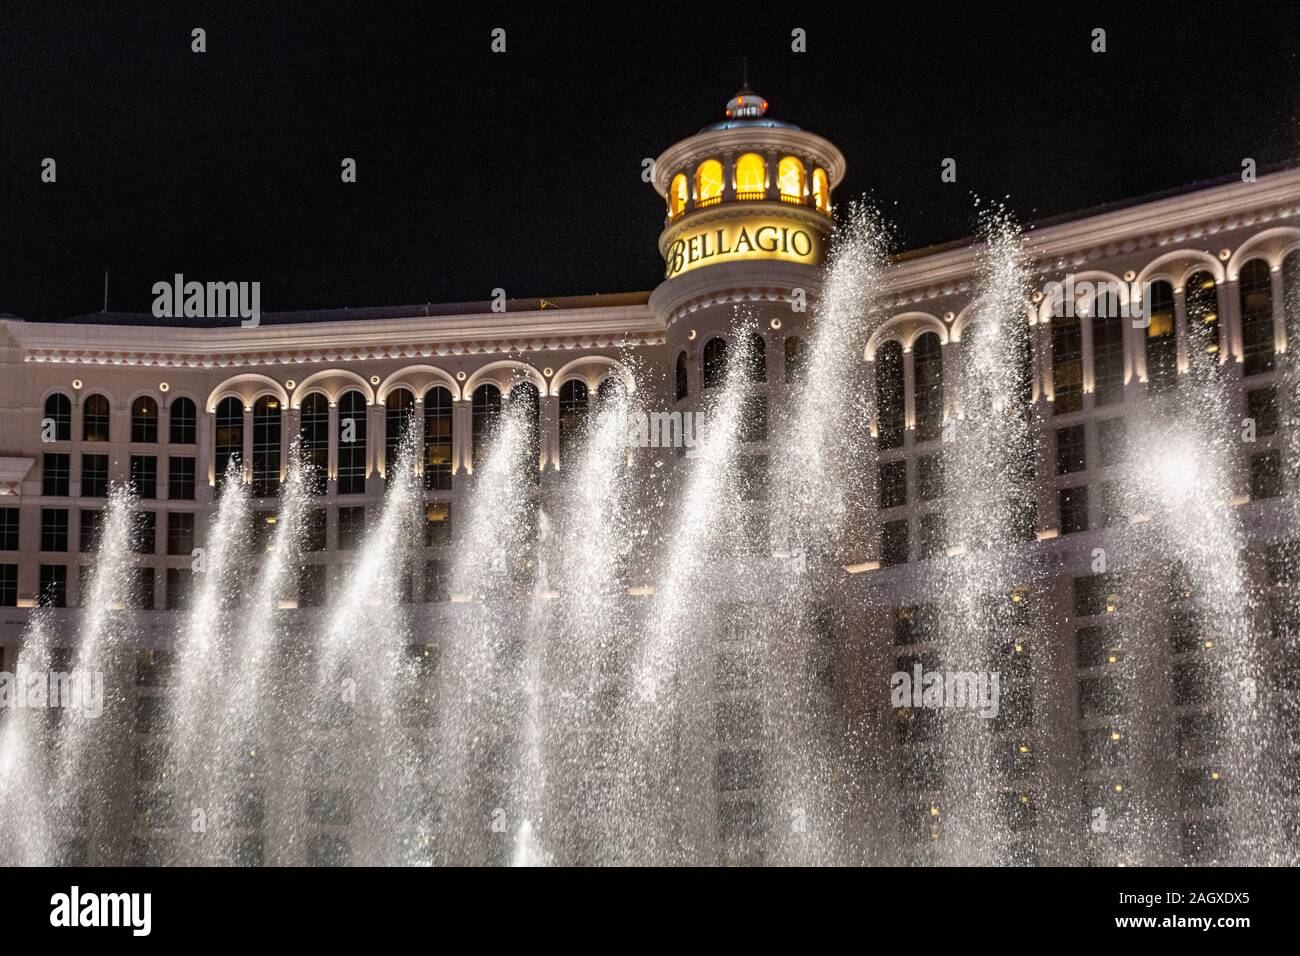 LAS VEGAS - JANUARY 24, 2018 : Fountains of Bellagio have been featured in several movies, is a large dancing water fountain synchronized to music on Stock Photo